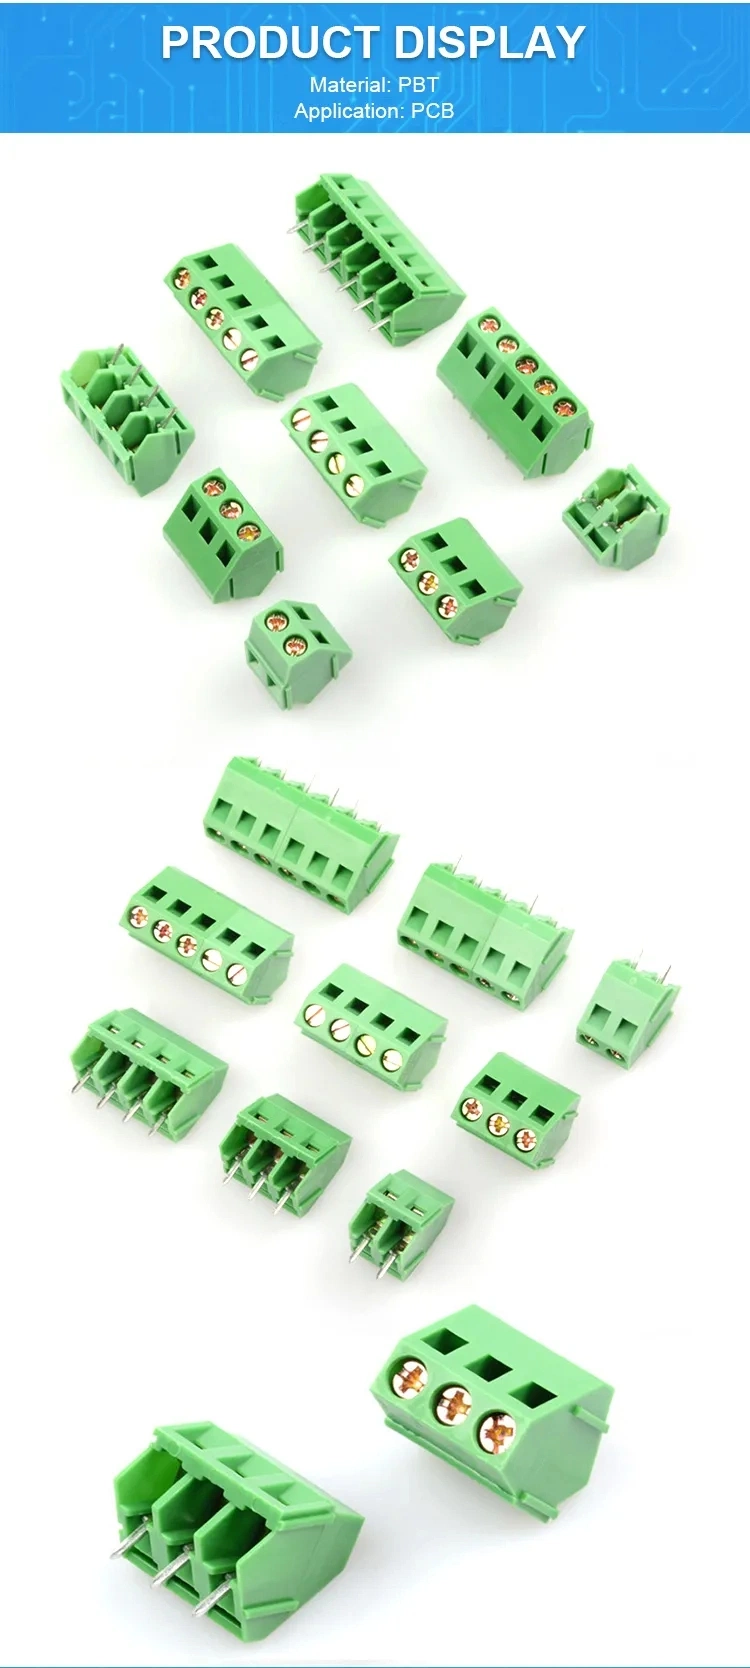 Spring Pluggable 2/3/4/5/6/7/8/9/10 Pin 3.81mm 5.0mm 5.08mm Pitch PCB Screw Terminal Block Connector Screwless Terminal Block